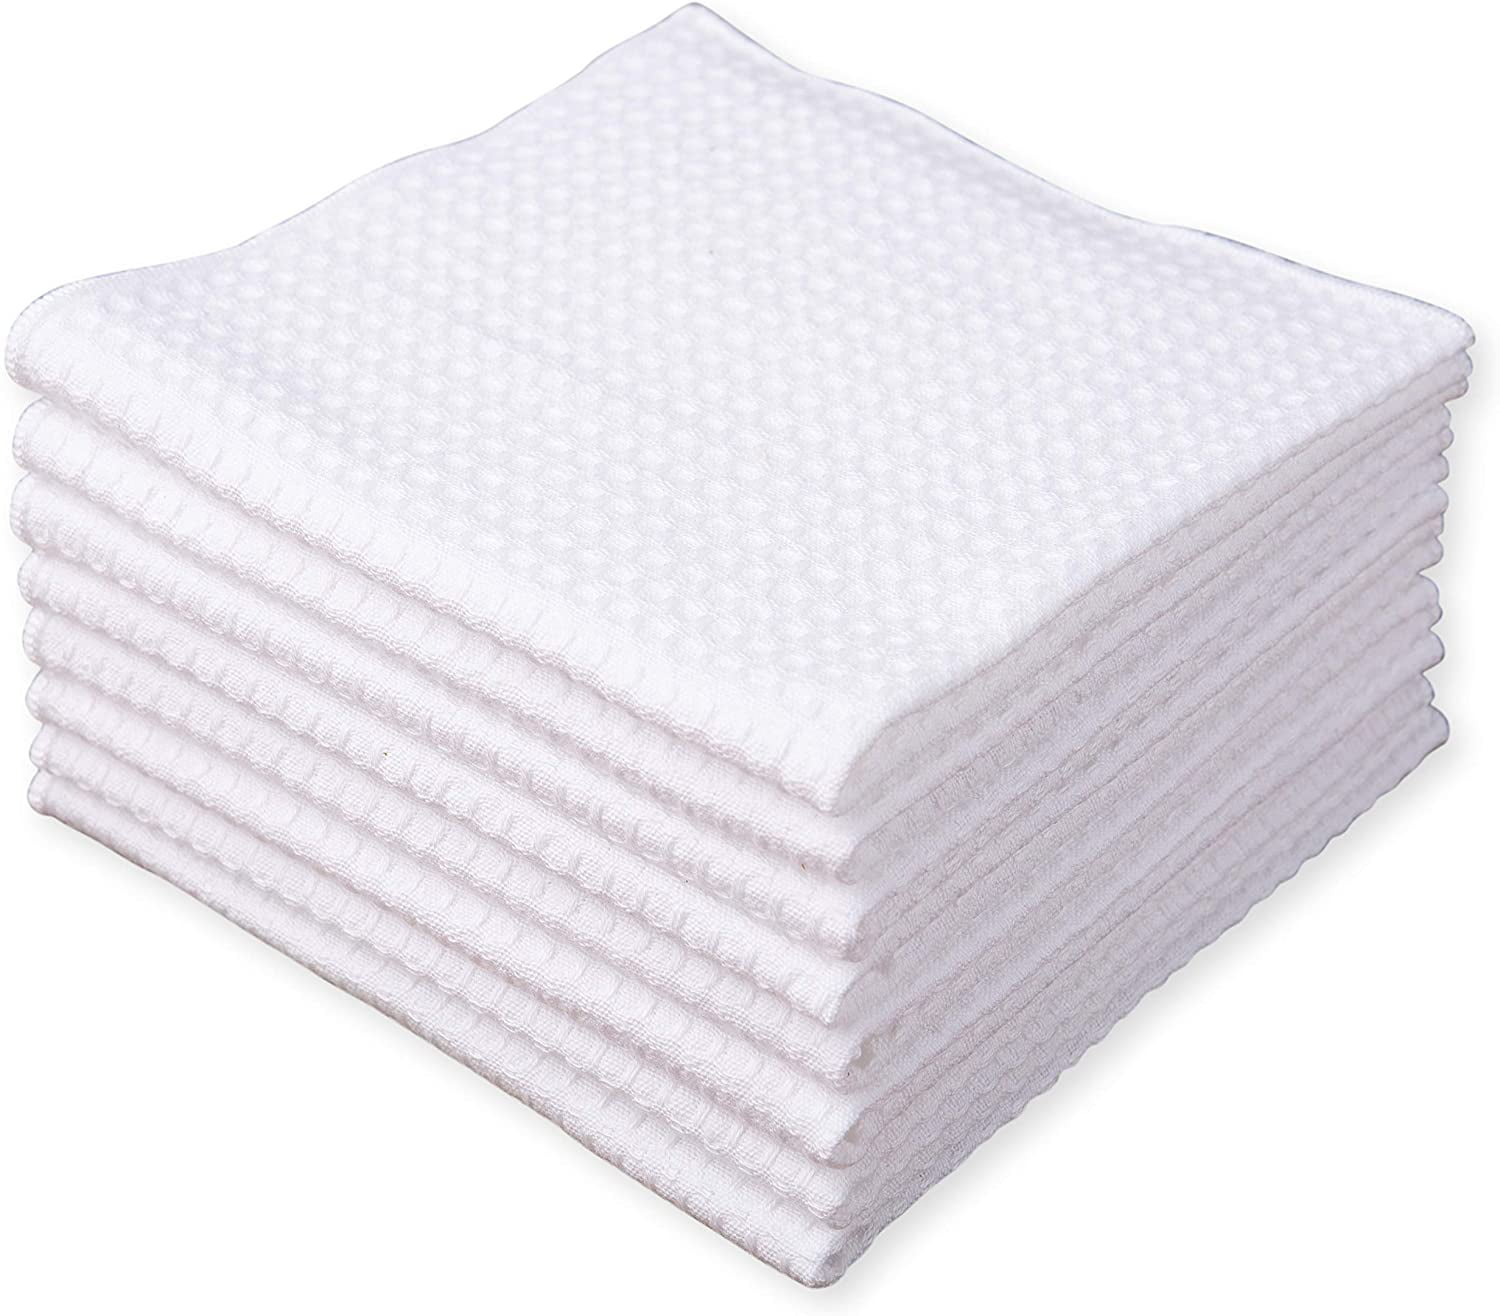 Sticky Toffee Kitchen Towels Dishcloths 100% Cotton, White Waffle